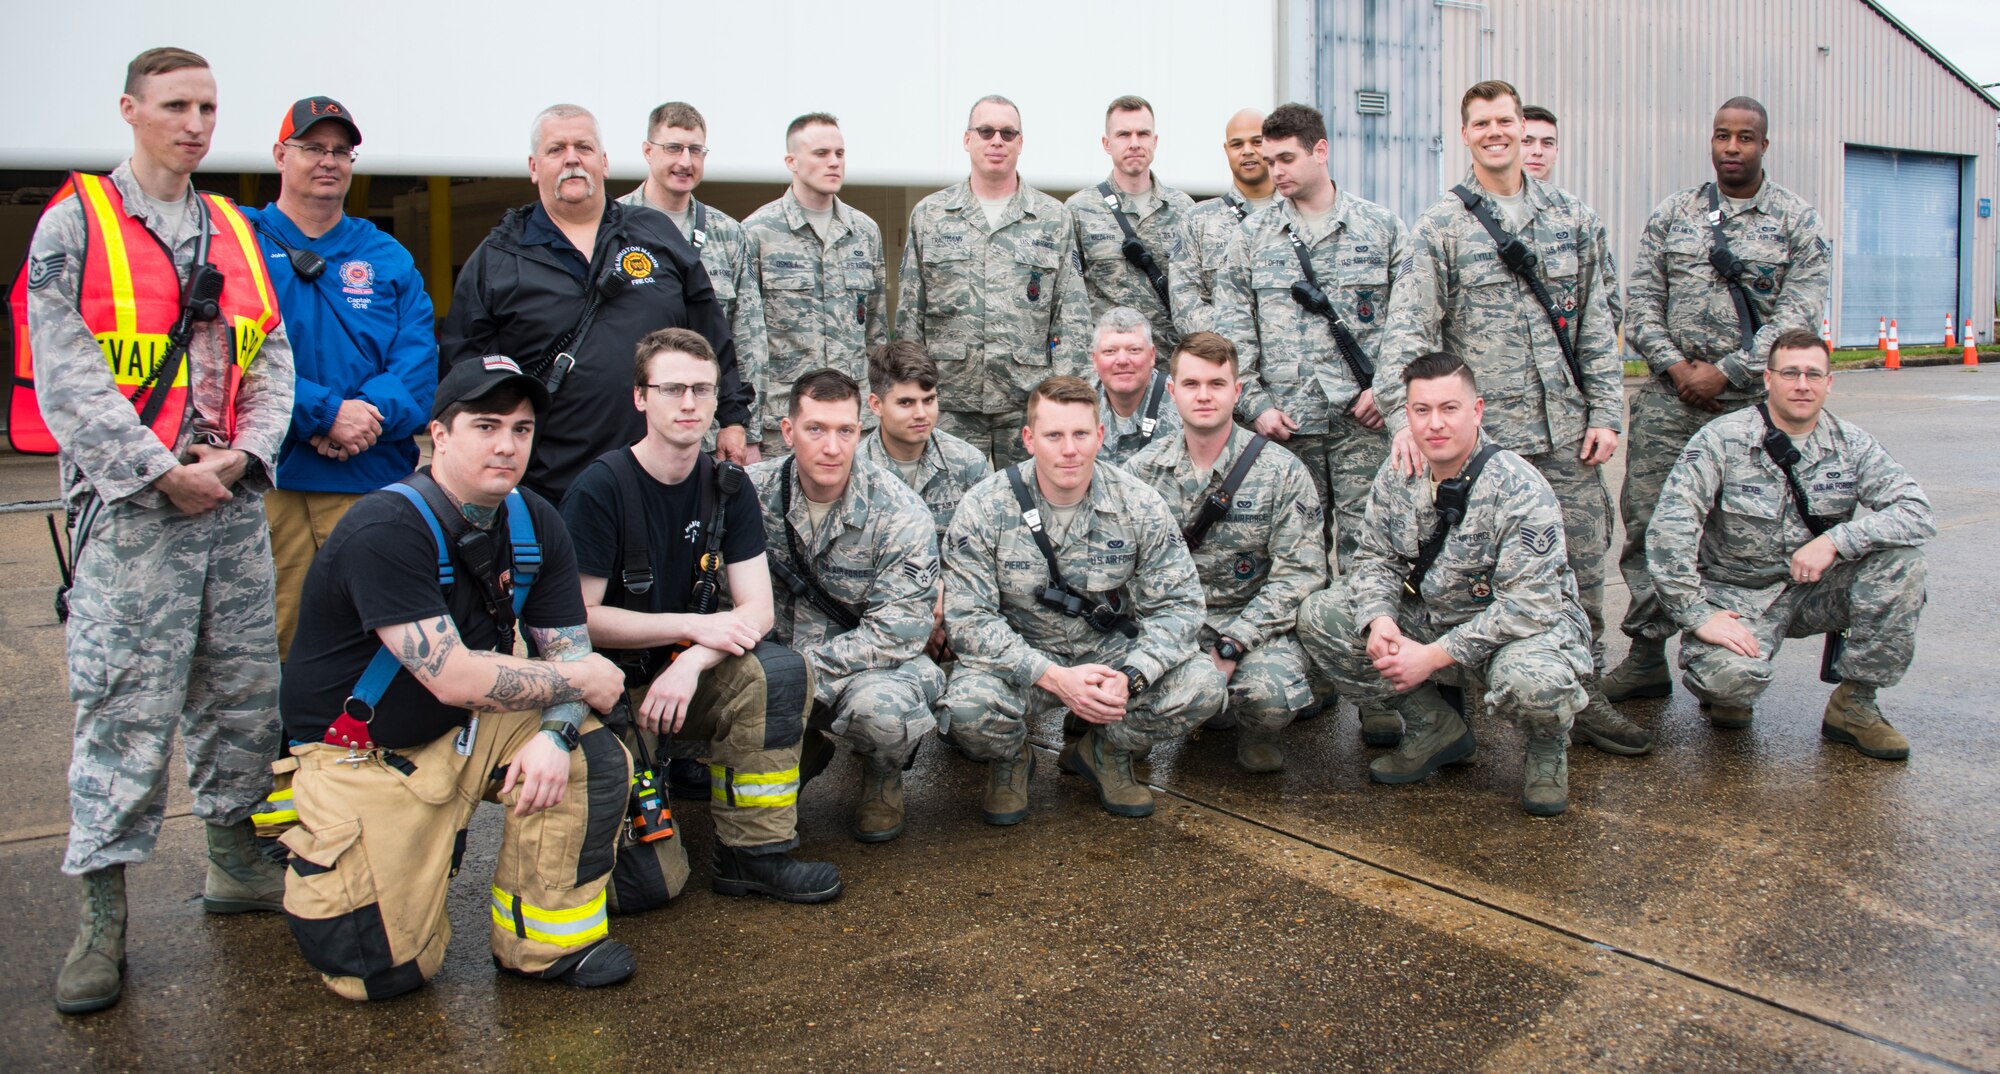 166th Civil Engineer Squadron firefighters pose for a group photo with Wilmington Manor Fire Company Director Bernie Nutter II prior to the start of Operation Blue Skywalker, April 10, 2019 at Delaware National Guard Base, Del. 166th CES firefighters worked in coordination with the Wilmington Manor Fire Company. (U.S. Air Force photo by Mr. Mitch Topal)